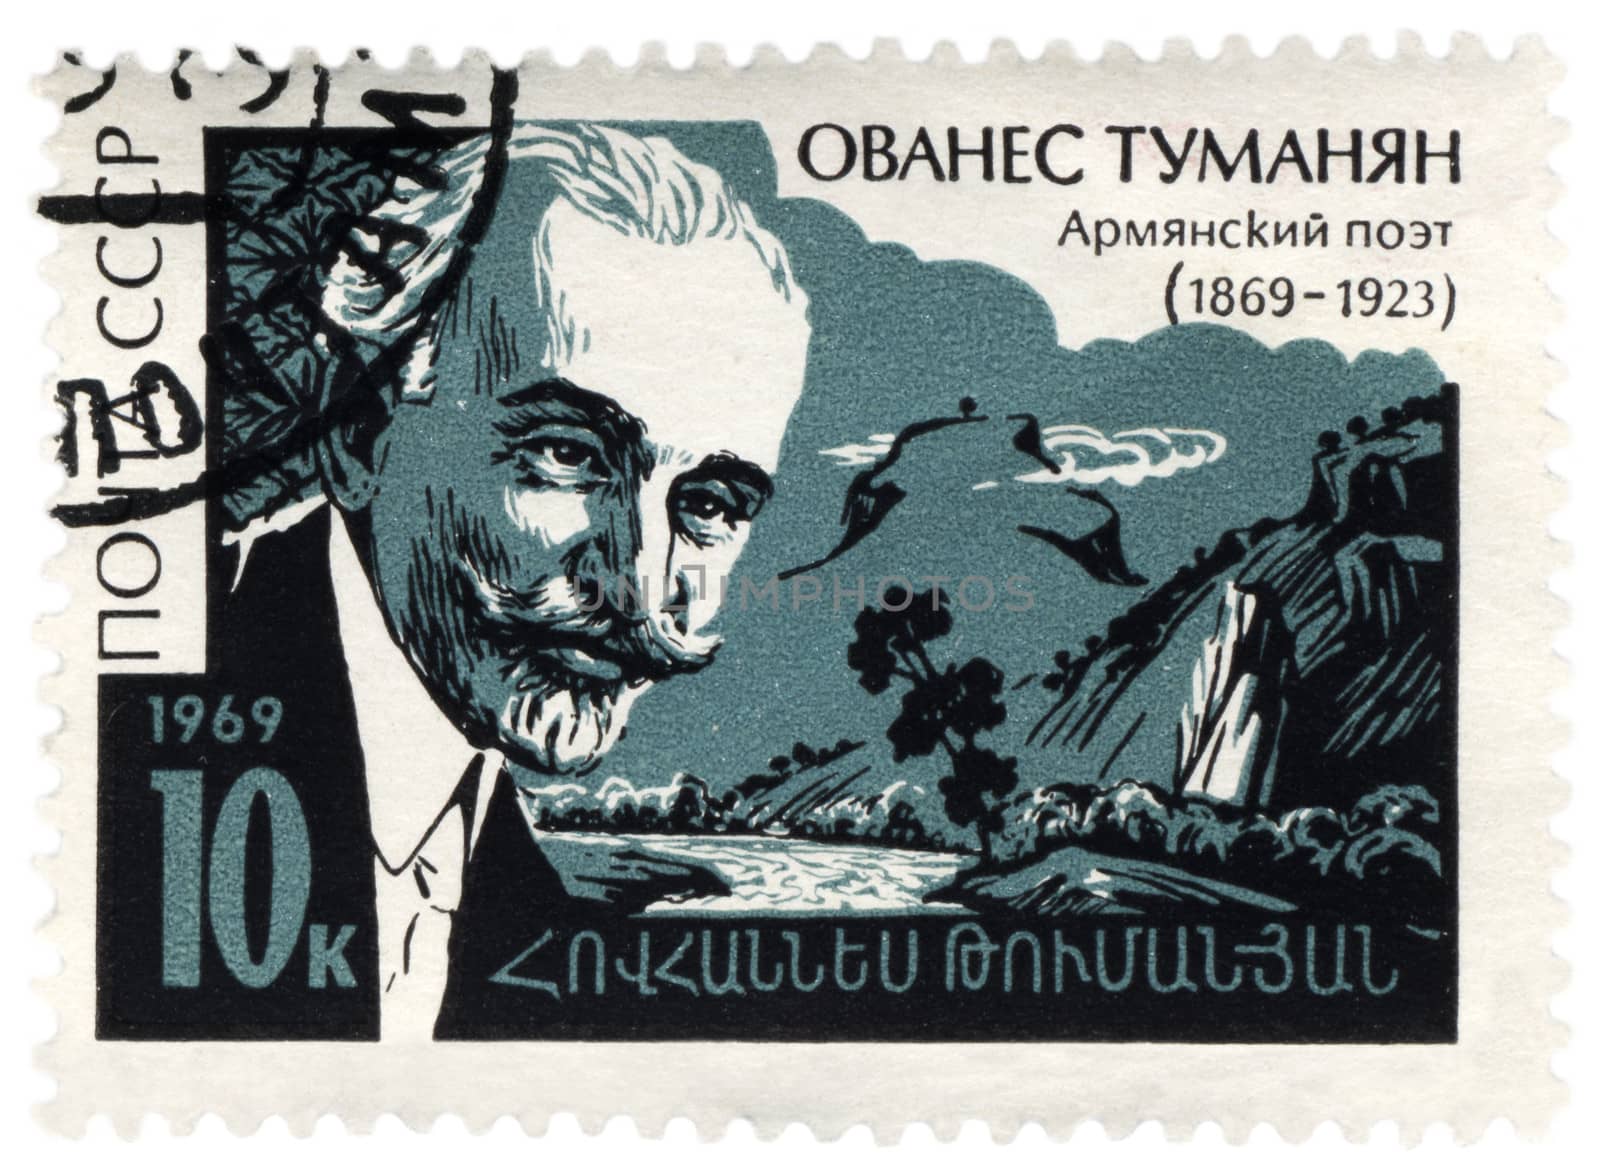 USSR - CIRCA 1969: post stamp printed in USSR shows portrait of Armenian poet Ovanes Tumanyan (1869-1923), circa 1969